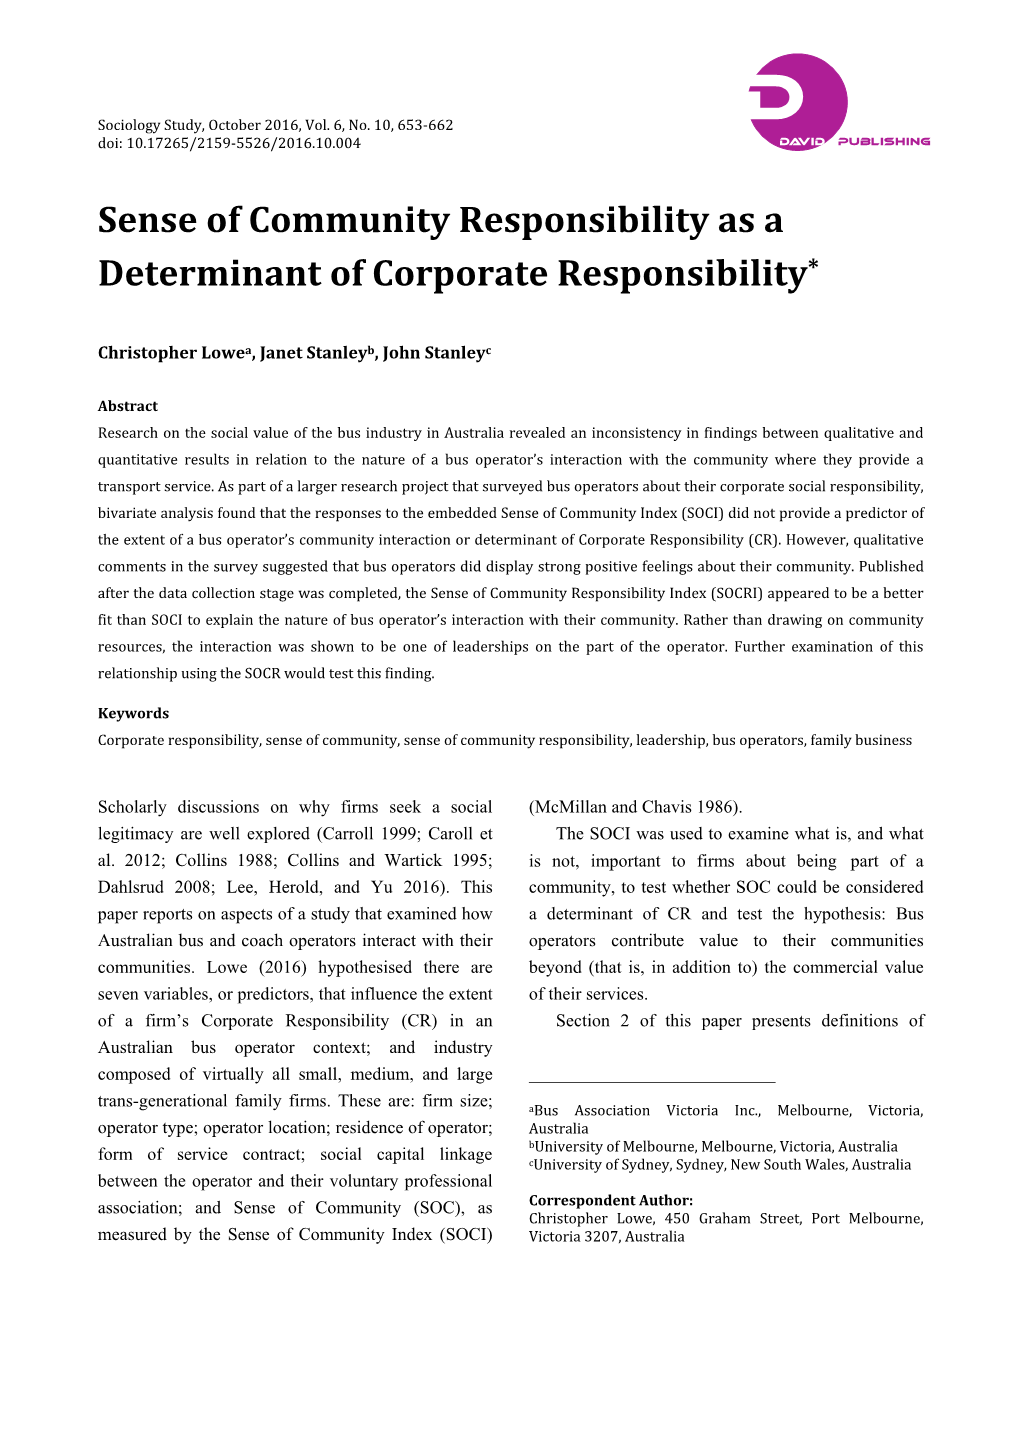 Sense of Community Responsibility As a Determinant of Corporate Responsibility*